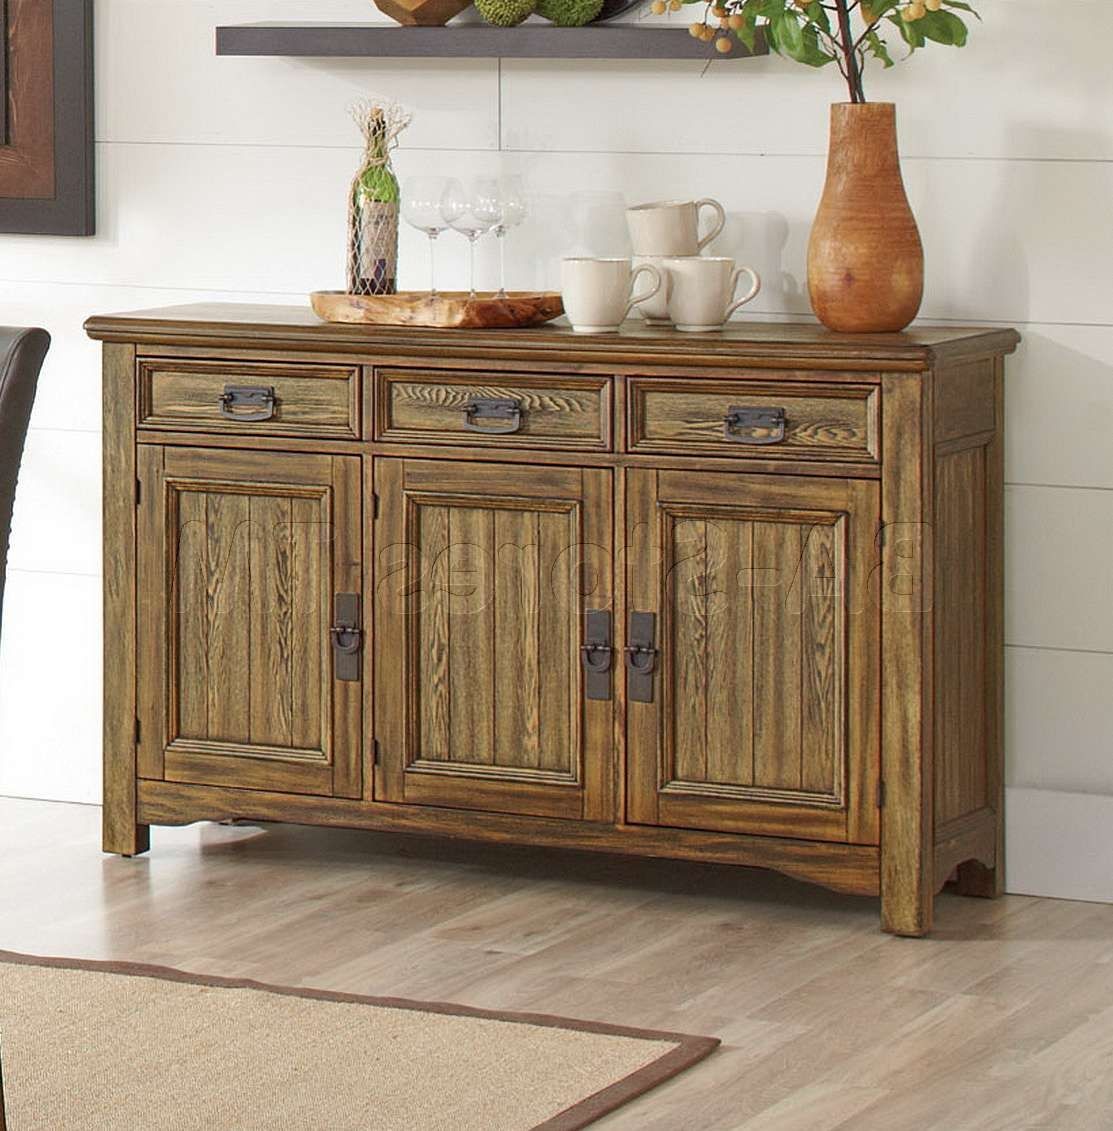 Kitchen Cabinet : Table Sideboard Sideboard And Hutch Small Pertaining To Sideboards And Servers (View 14 of 20)